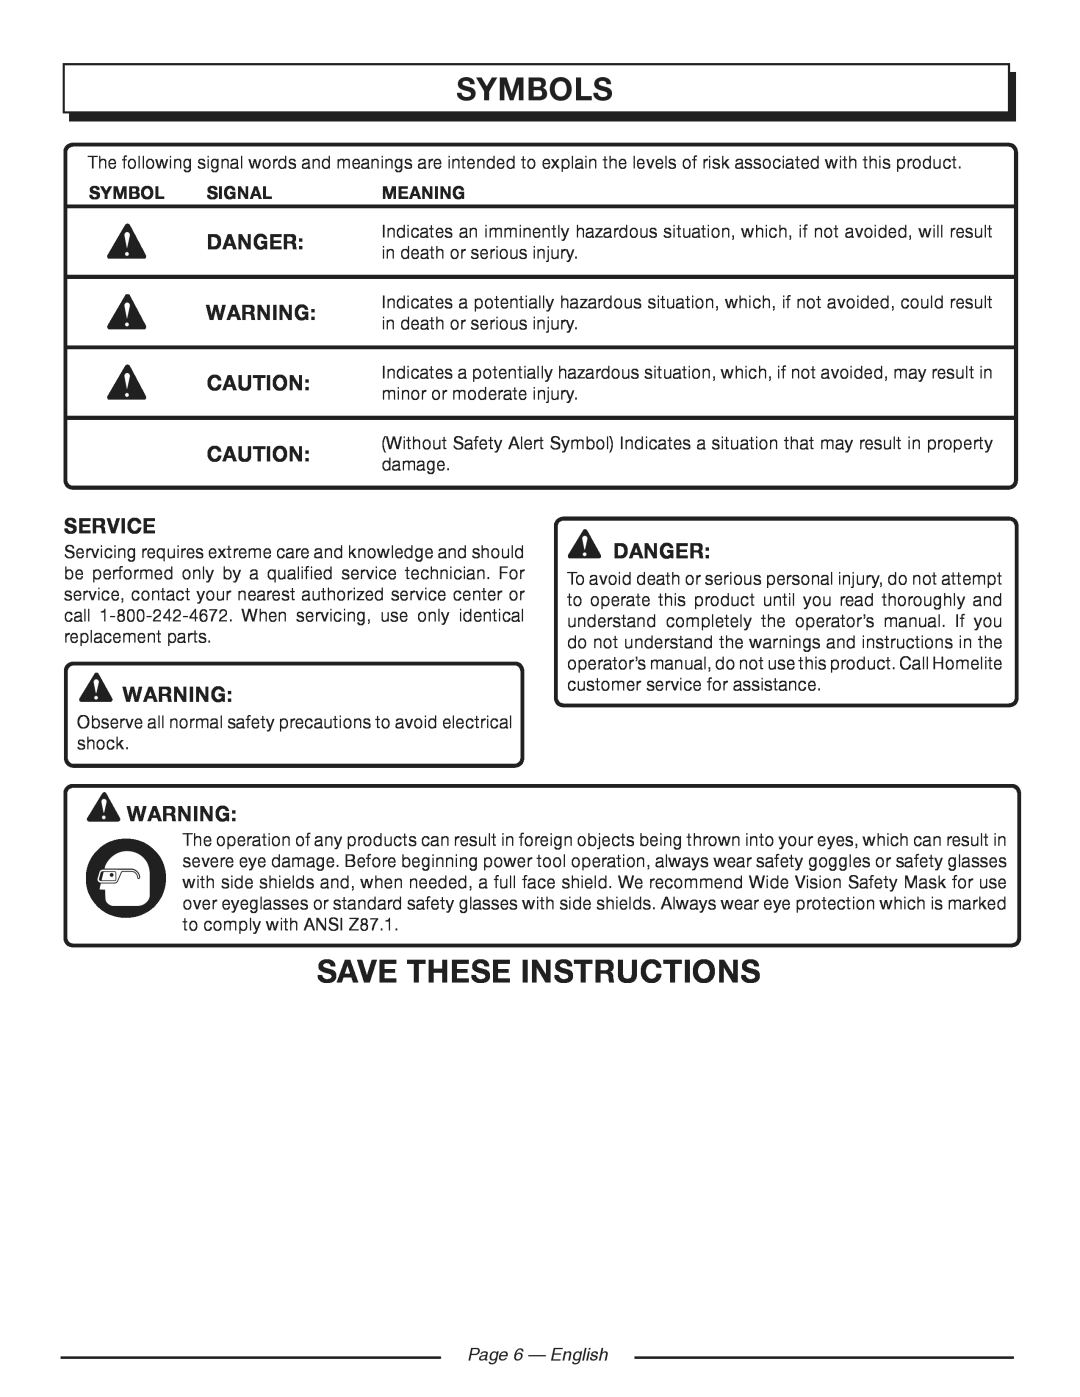 Homelite HGCA3000 Save These Instructions, Service, danger, Signal, Meaning, Page 6 - English, Symbols, Danger 